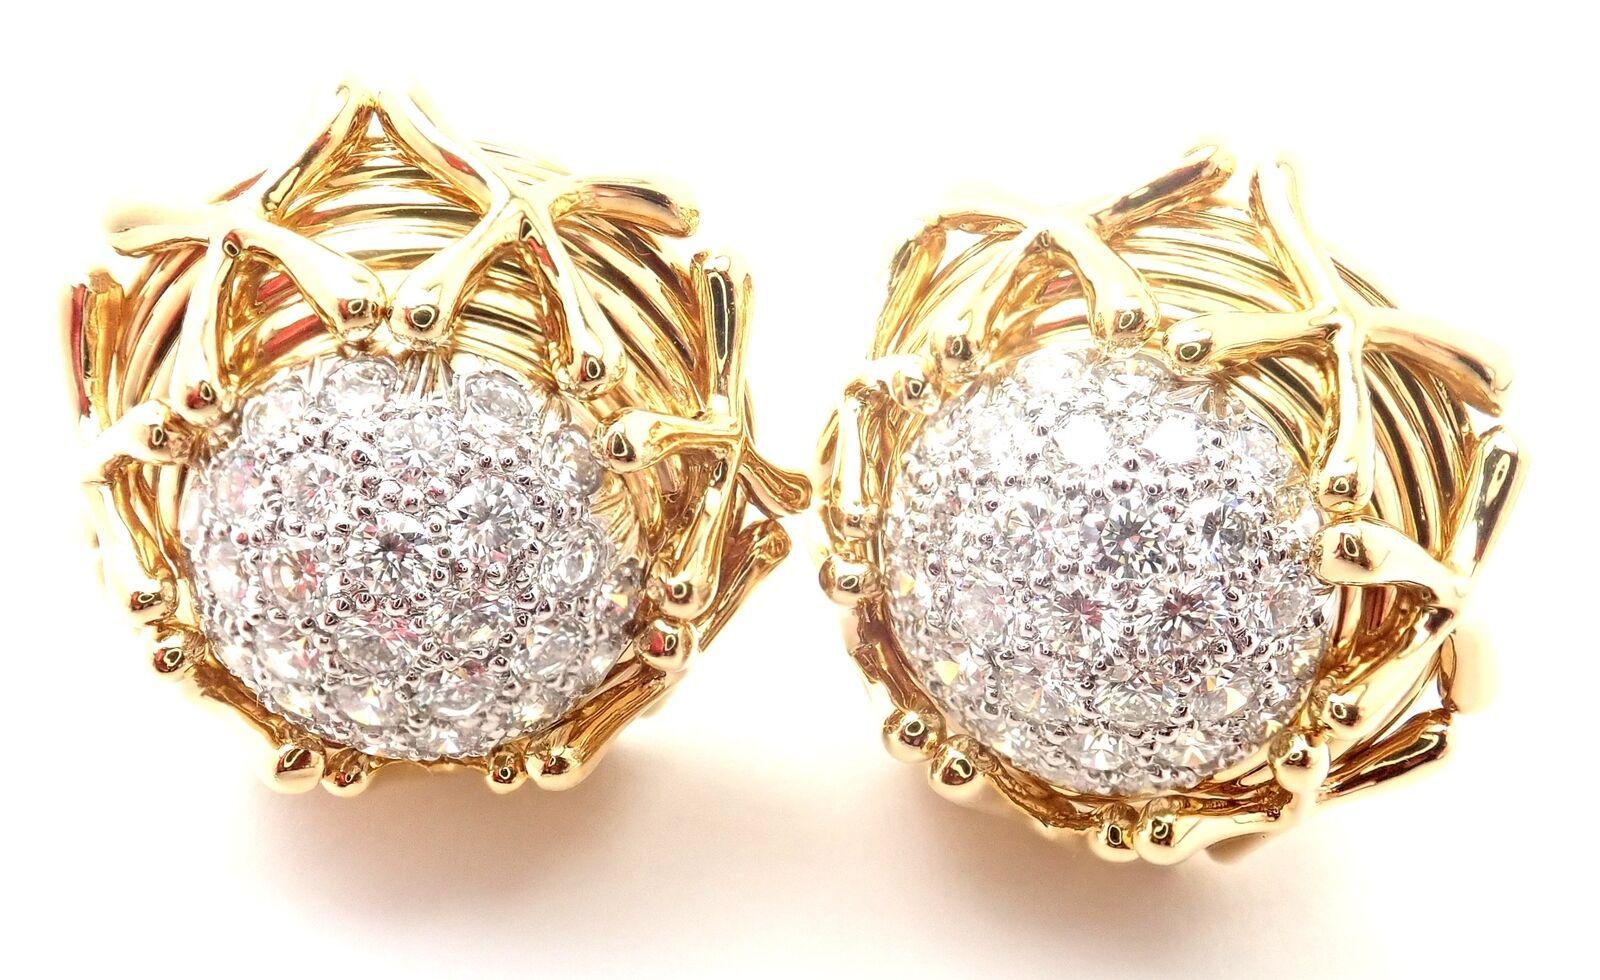 Platinum & 18k Yellow Gold  Diamond Multiplication Large Earrings by Jean Schlumberger for Tiffany & Co. 
With 58 Round Brilliant Cut Diamonds VS1 clarity, G color total weight approximately 2.88ct
These earrings are Out stock now on Tiffany & Co